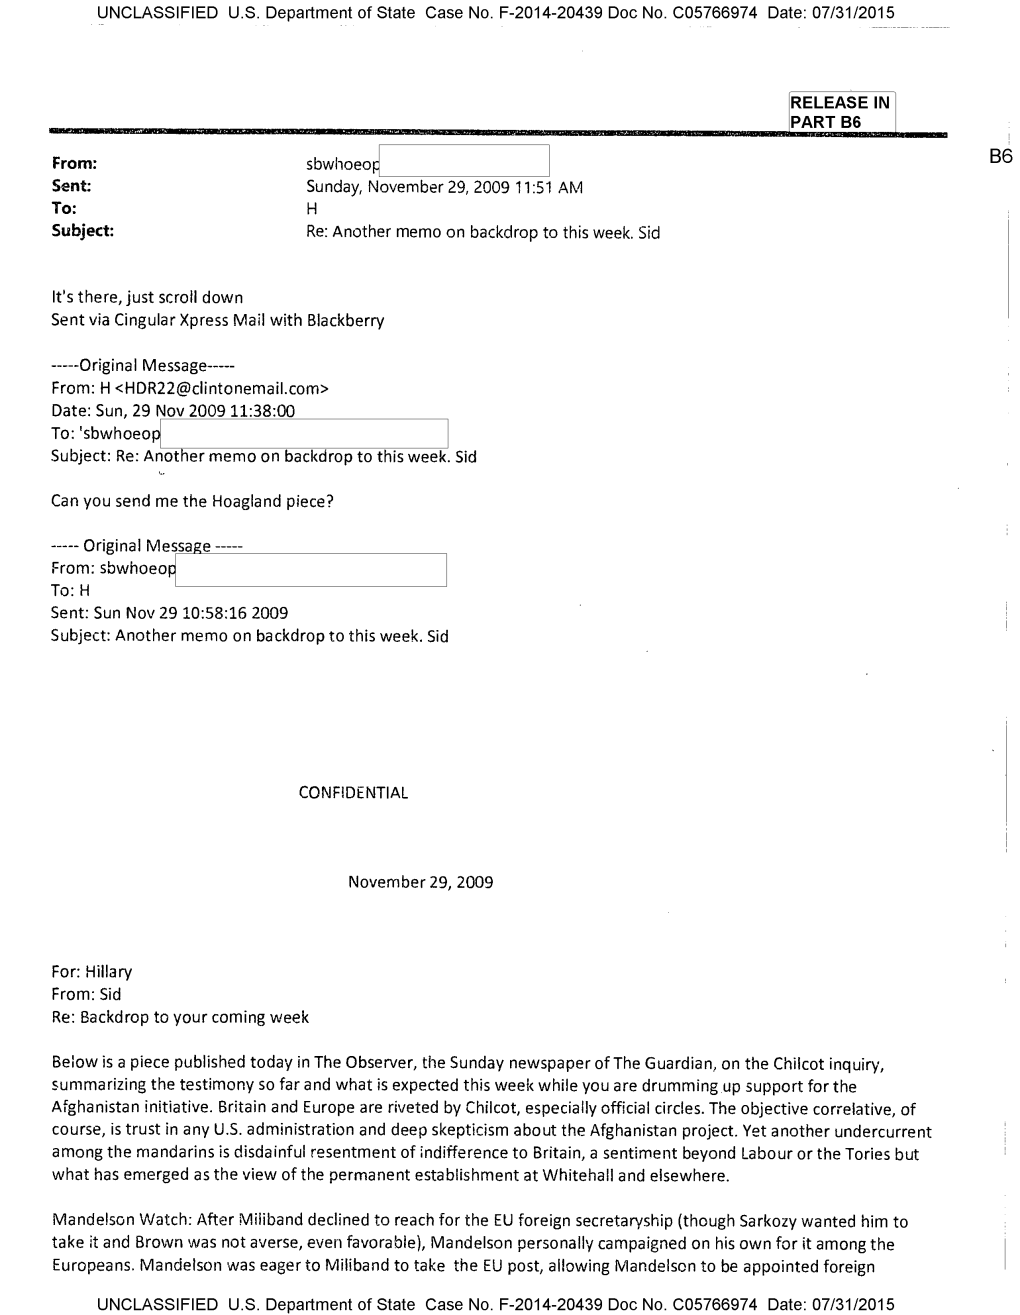 Download Clinton Email July Release/C05766974.Pdf